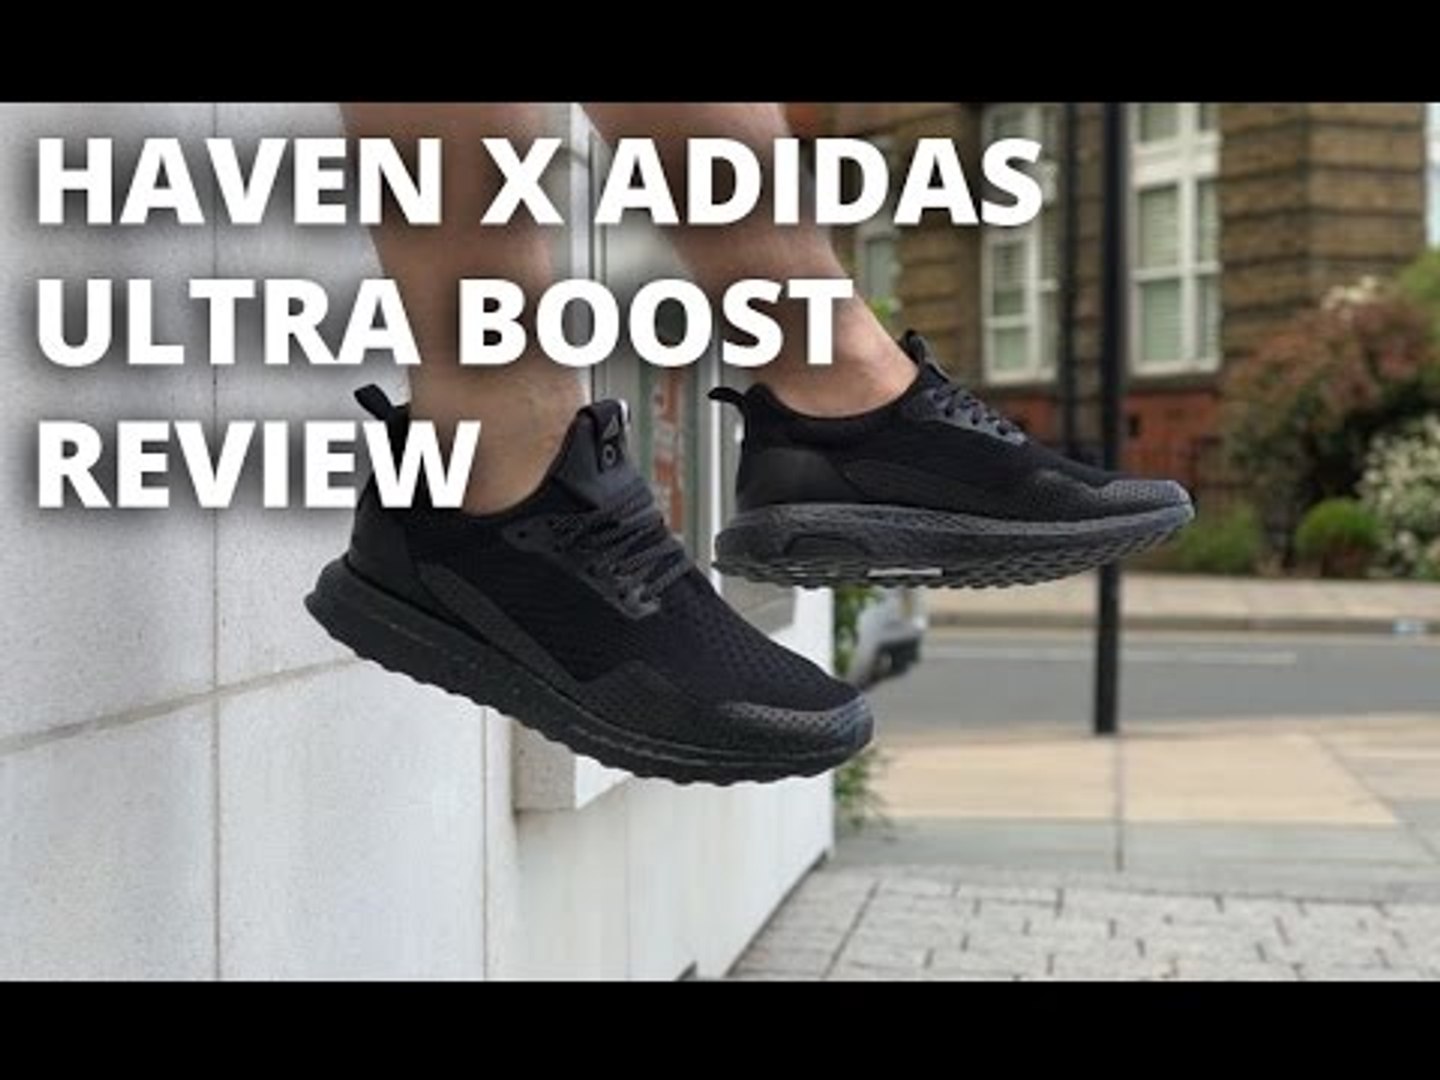 Haven x adidas Ultra Boost Review / Unboxing & On Foot - video Dailymotion